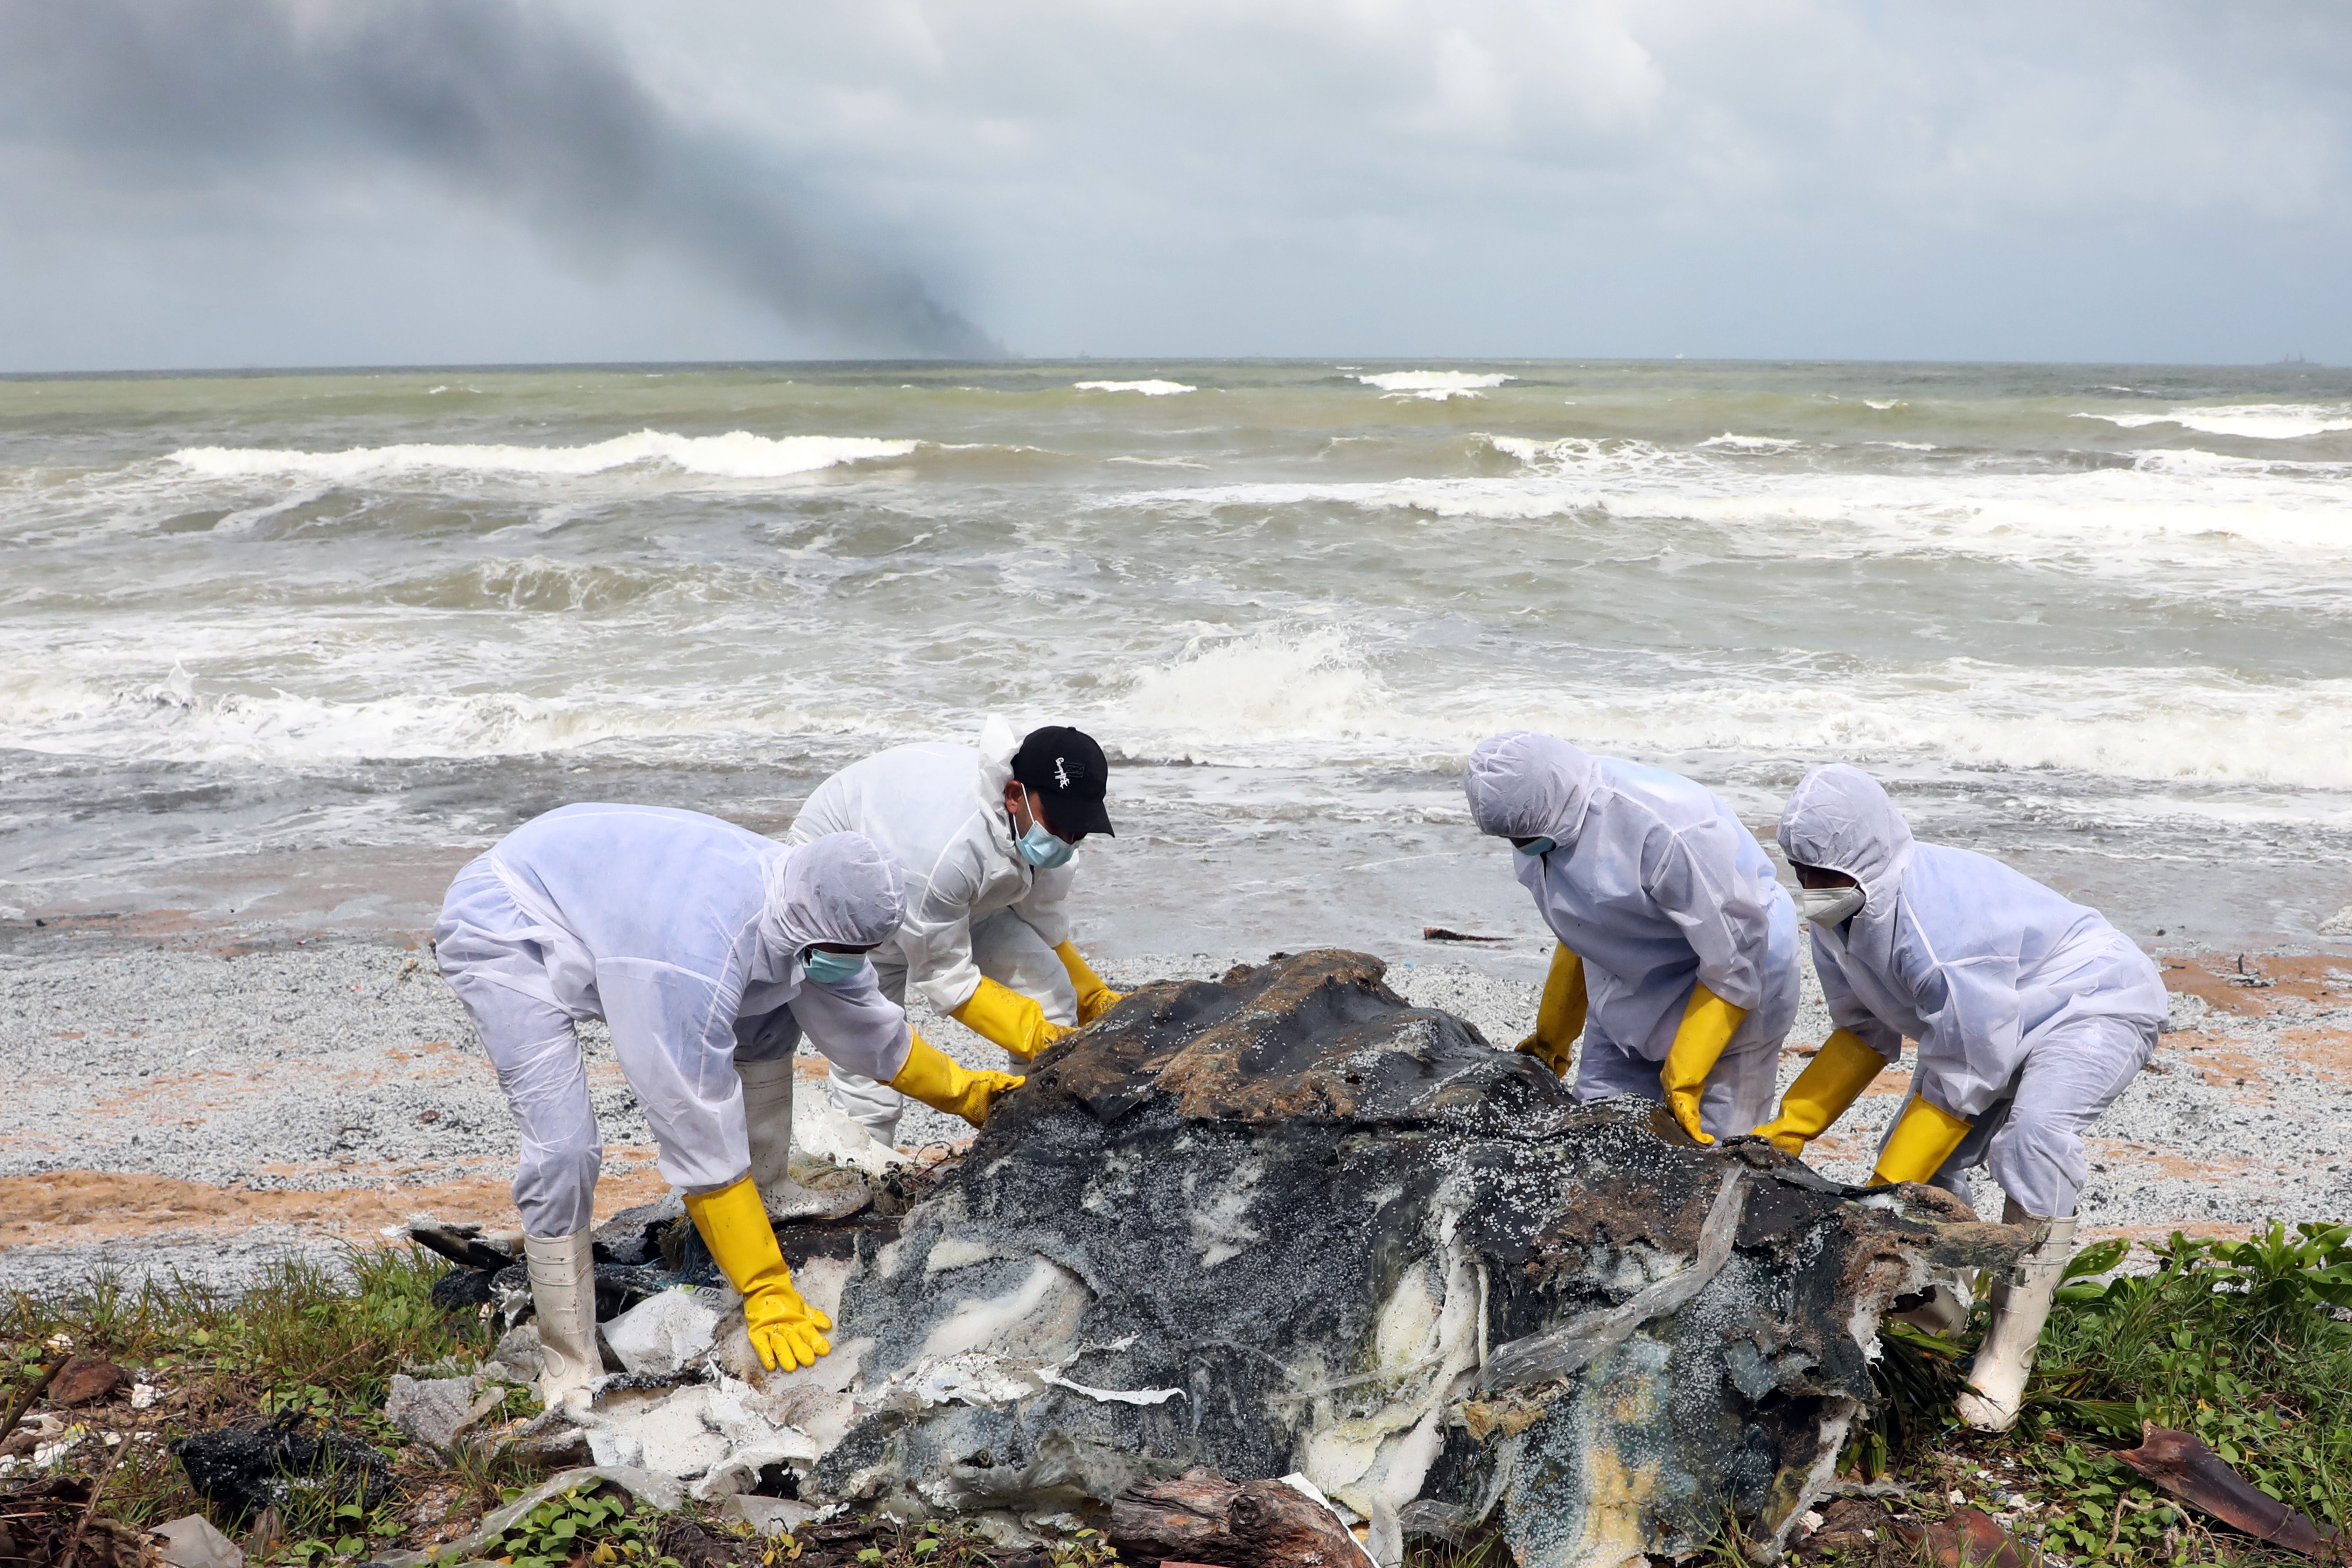 Sri Lanka Navy personnel in protective clothing pull ashore the metal remnants of a container washed ashore from the burning cargo vessel 